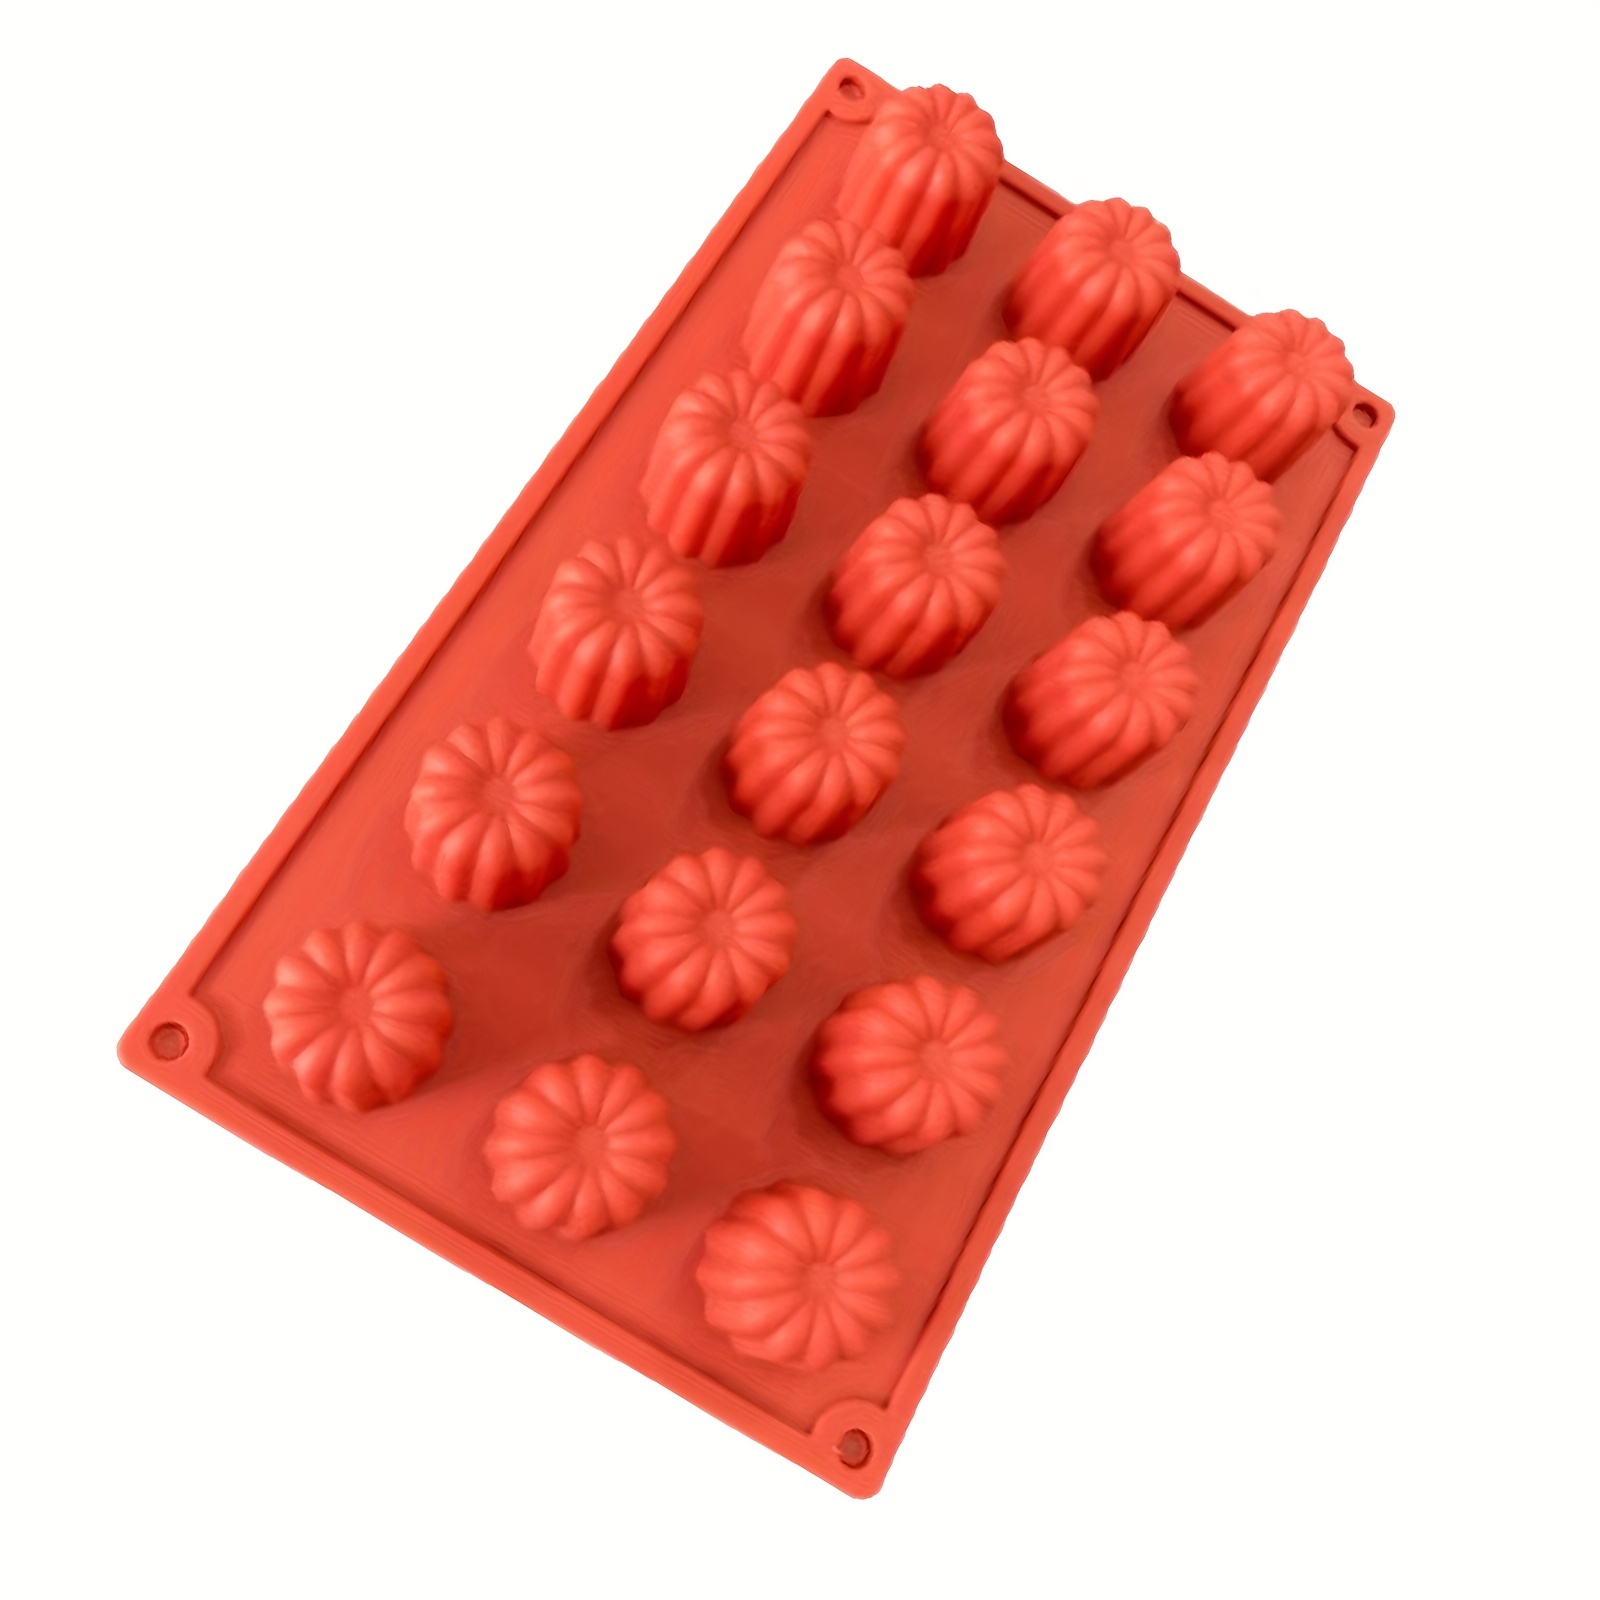 1pc silicone canele molds 8 or 18 cavity cake molds for easy demoulding perfect for baking and desserts kitchen gadgets and accessories